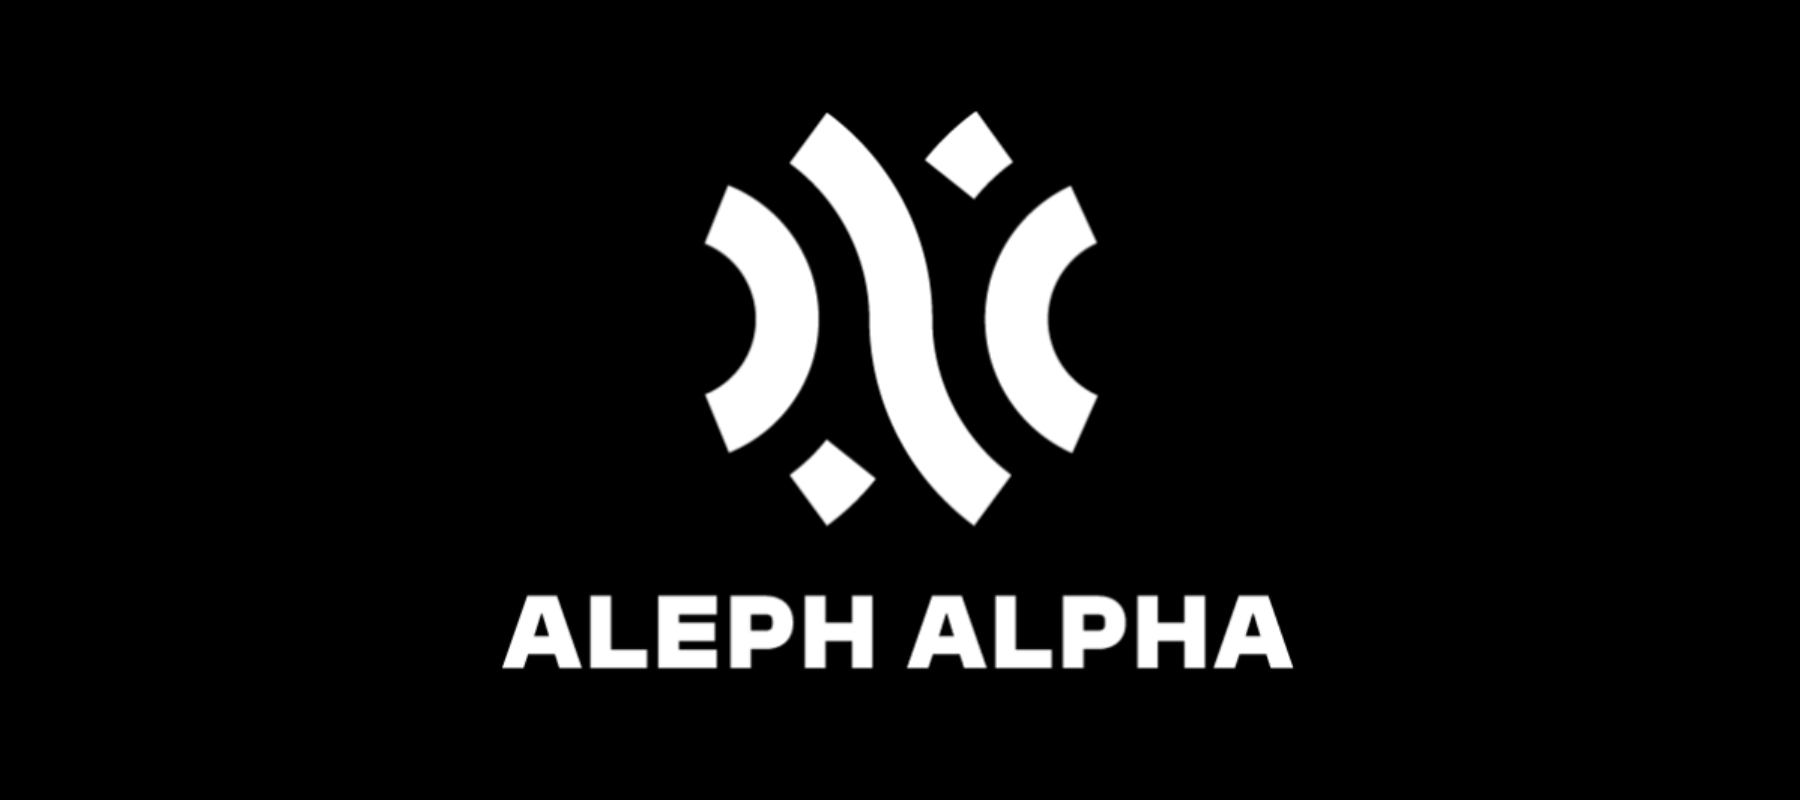 20-facts-about-aleph-alpha